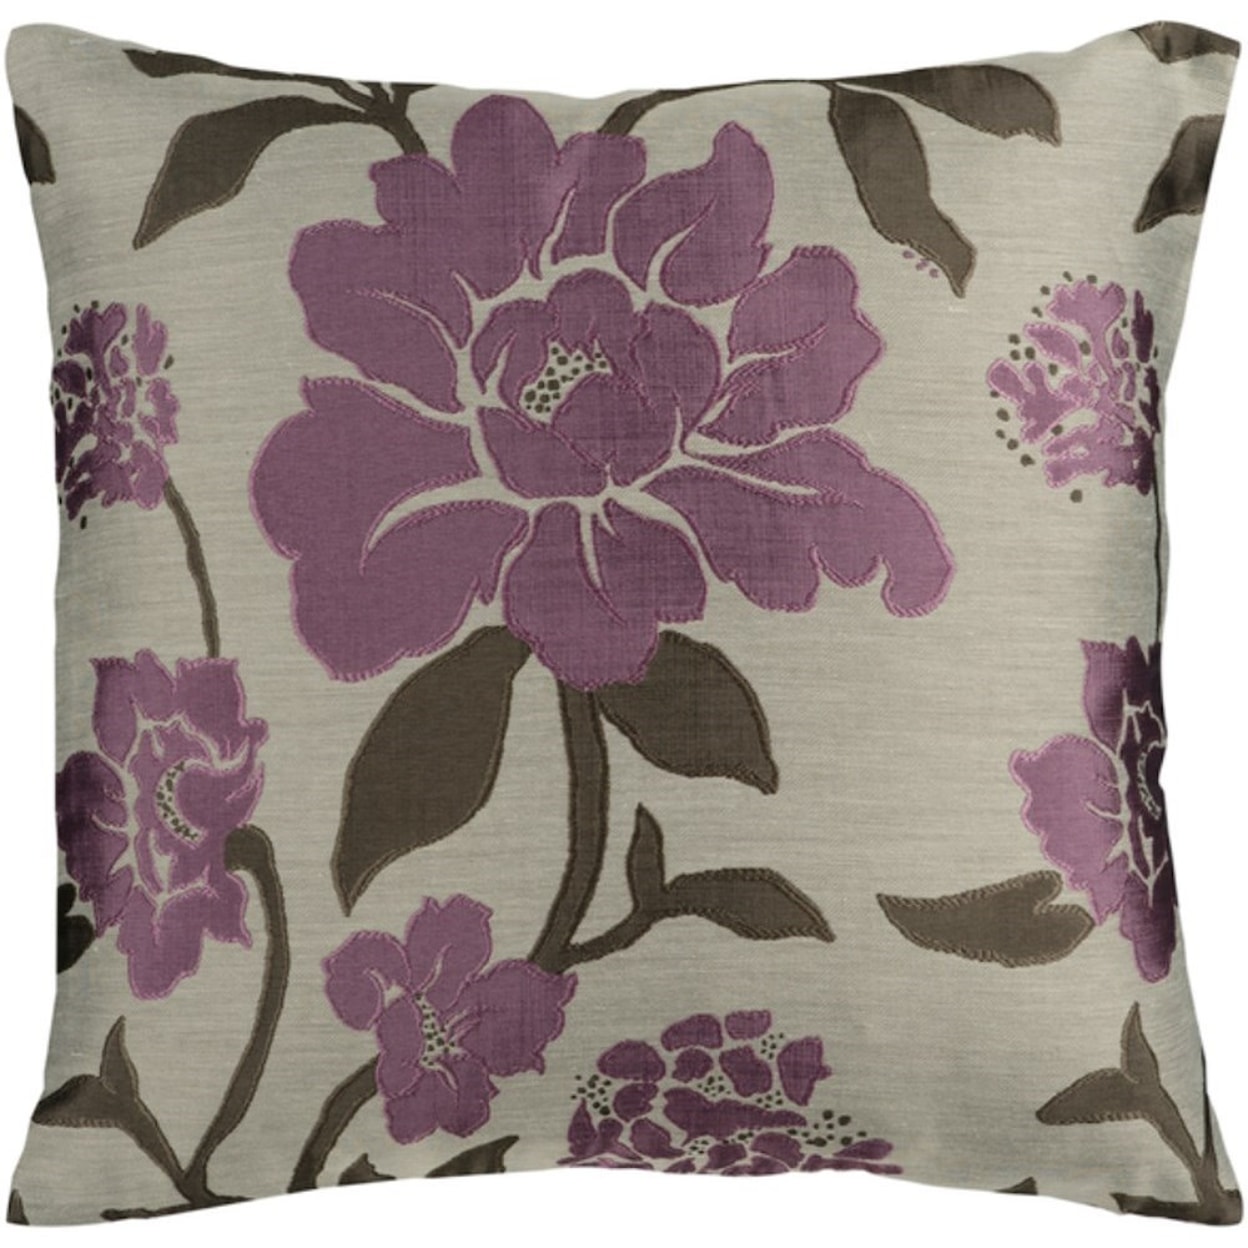 Ruby-Gordon Accents Blossom1 Pillow